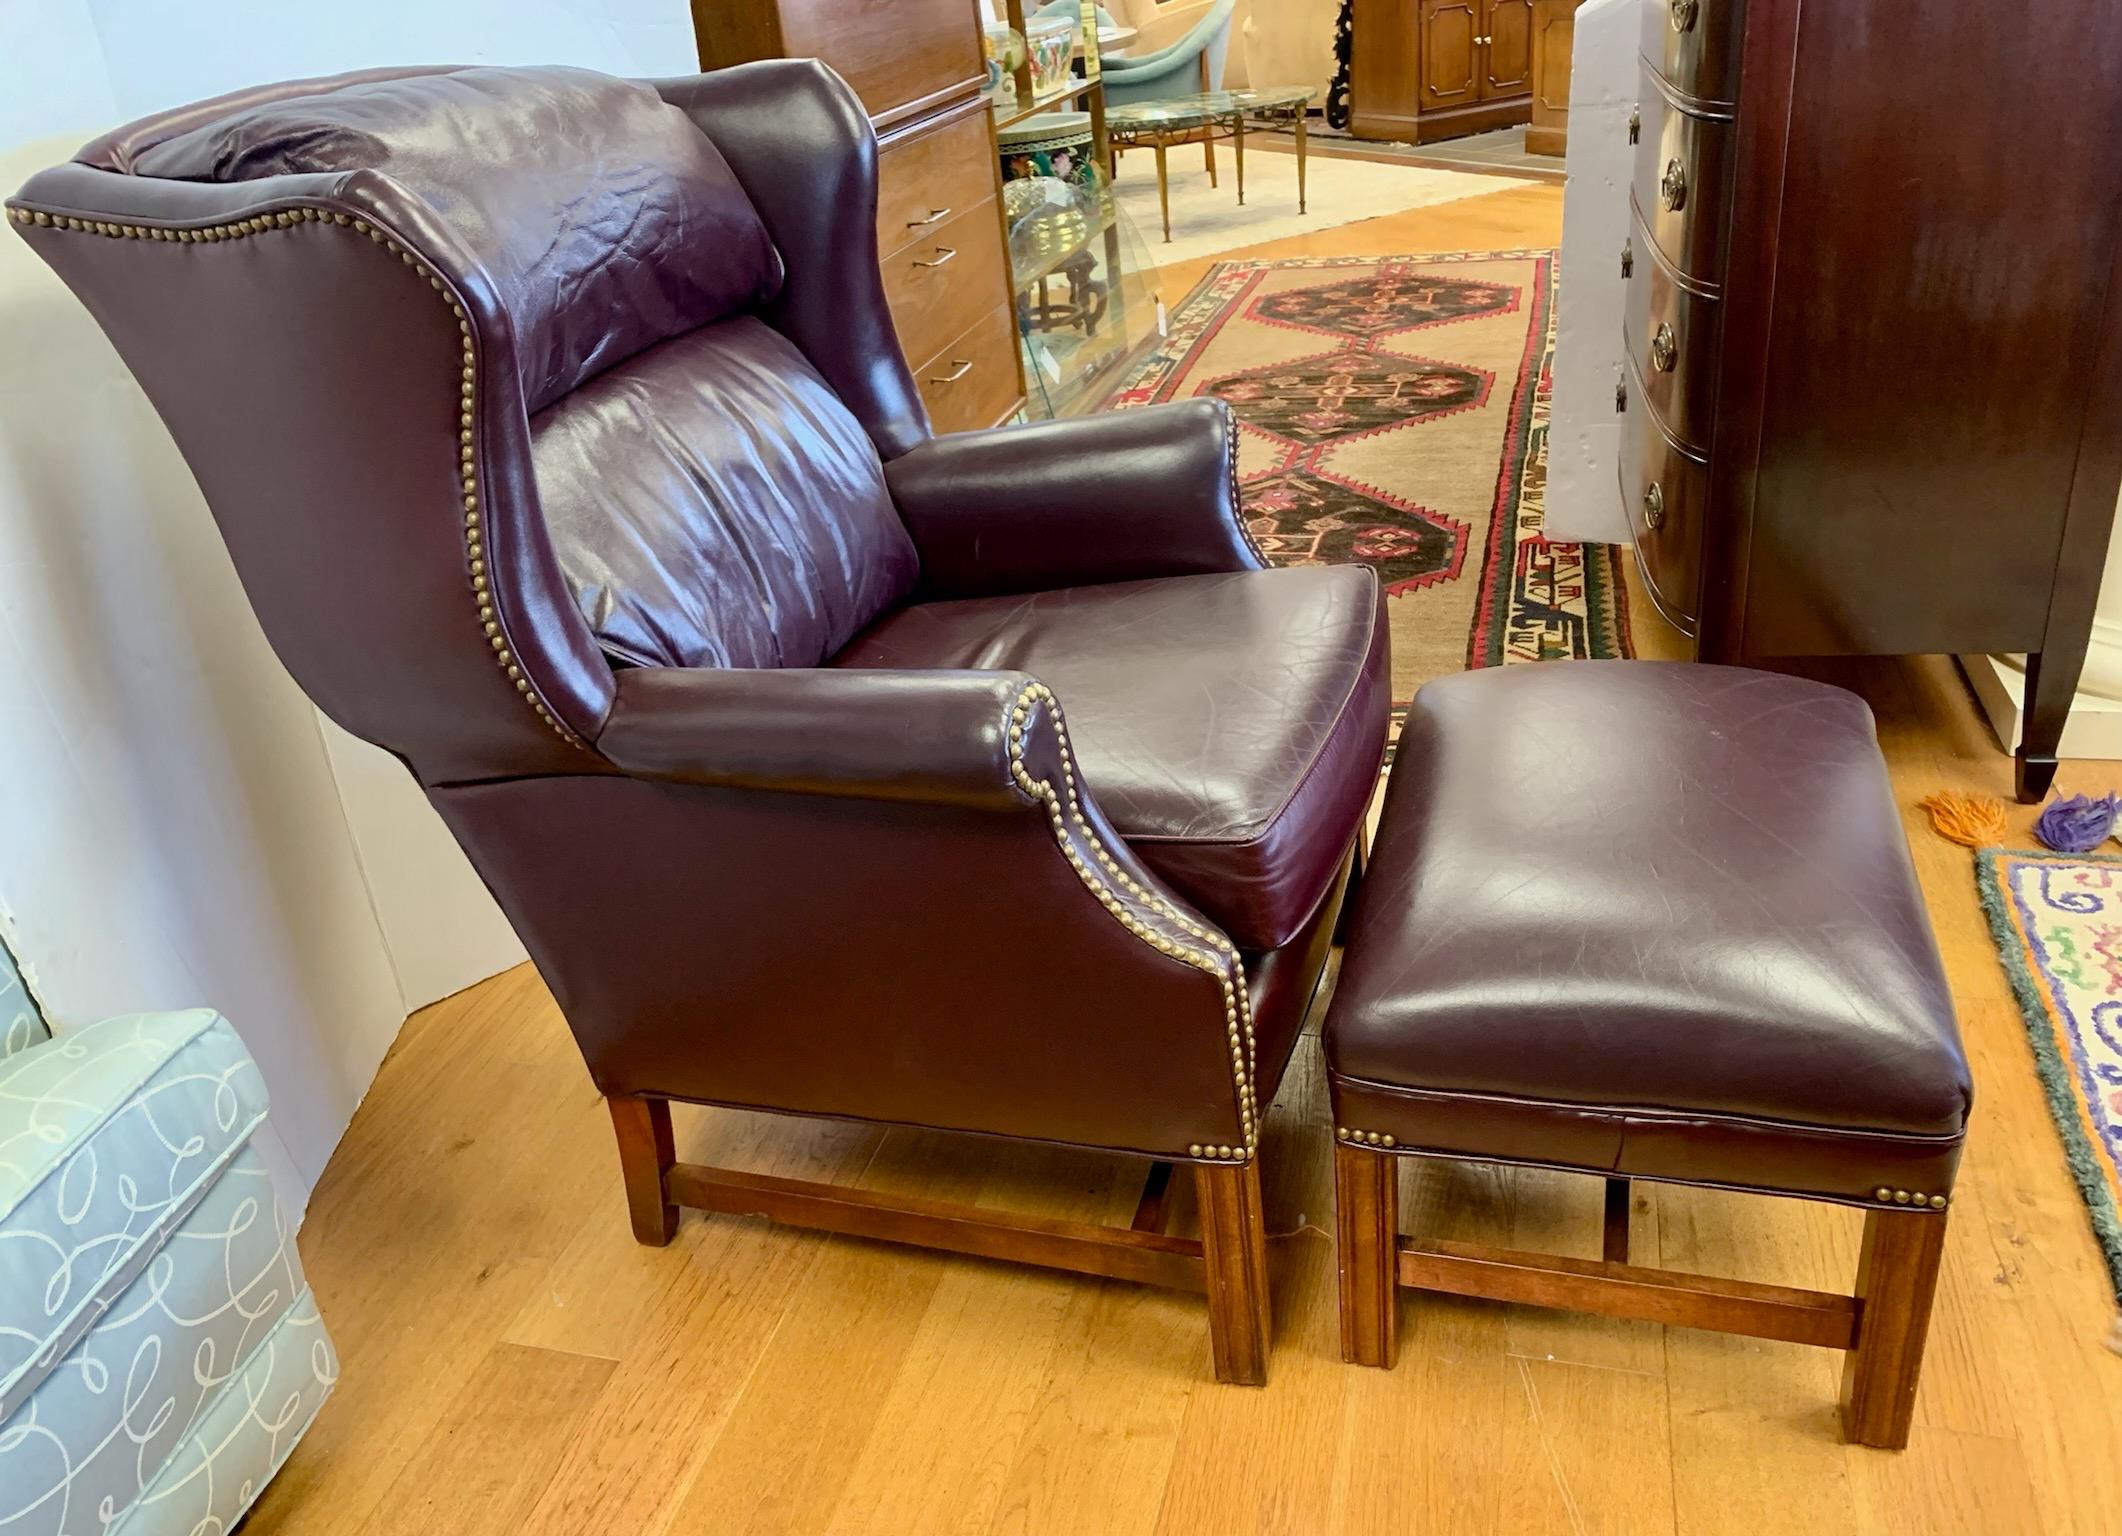 Classic wingback chair and matching ottoman upholstered in a rich burgundy leather and accented with brass nailheads. Chair has attached pillow back for extra comfort. Timeless and well constructed by By Sherrill Furniture.